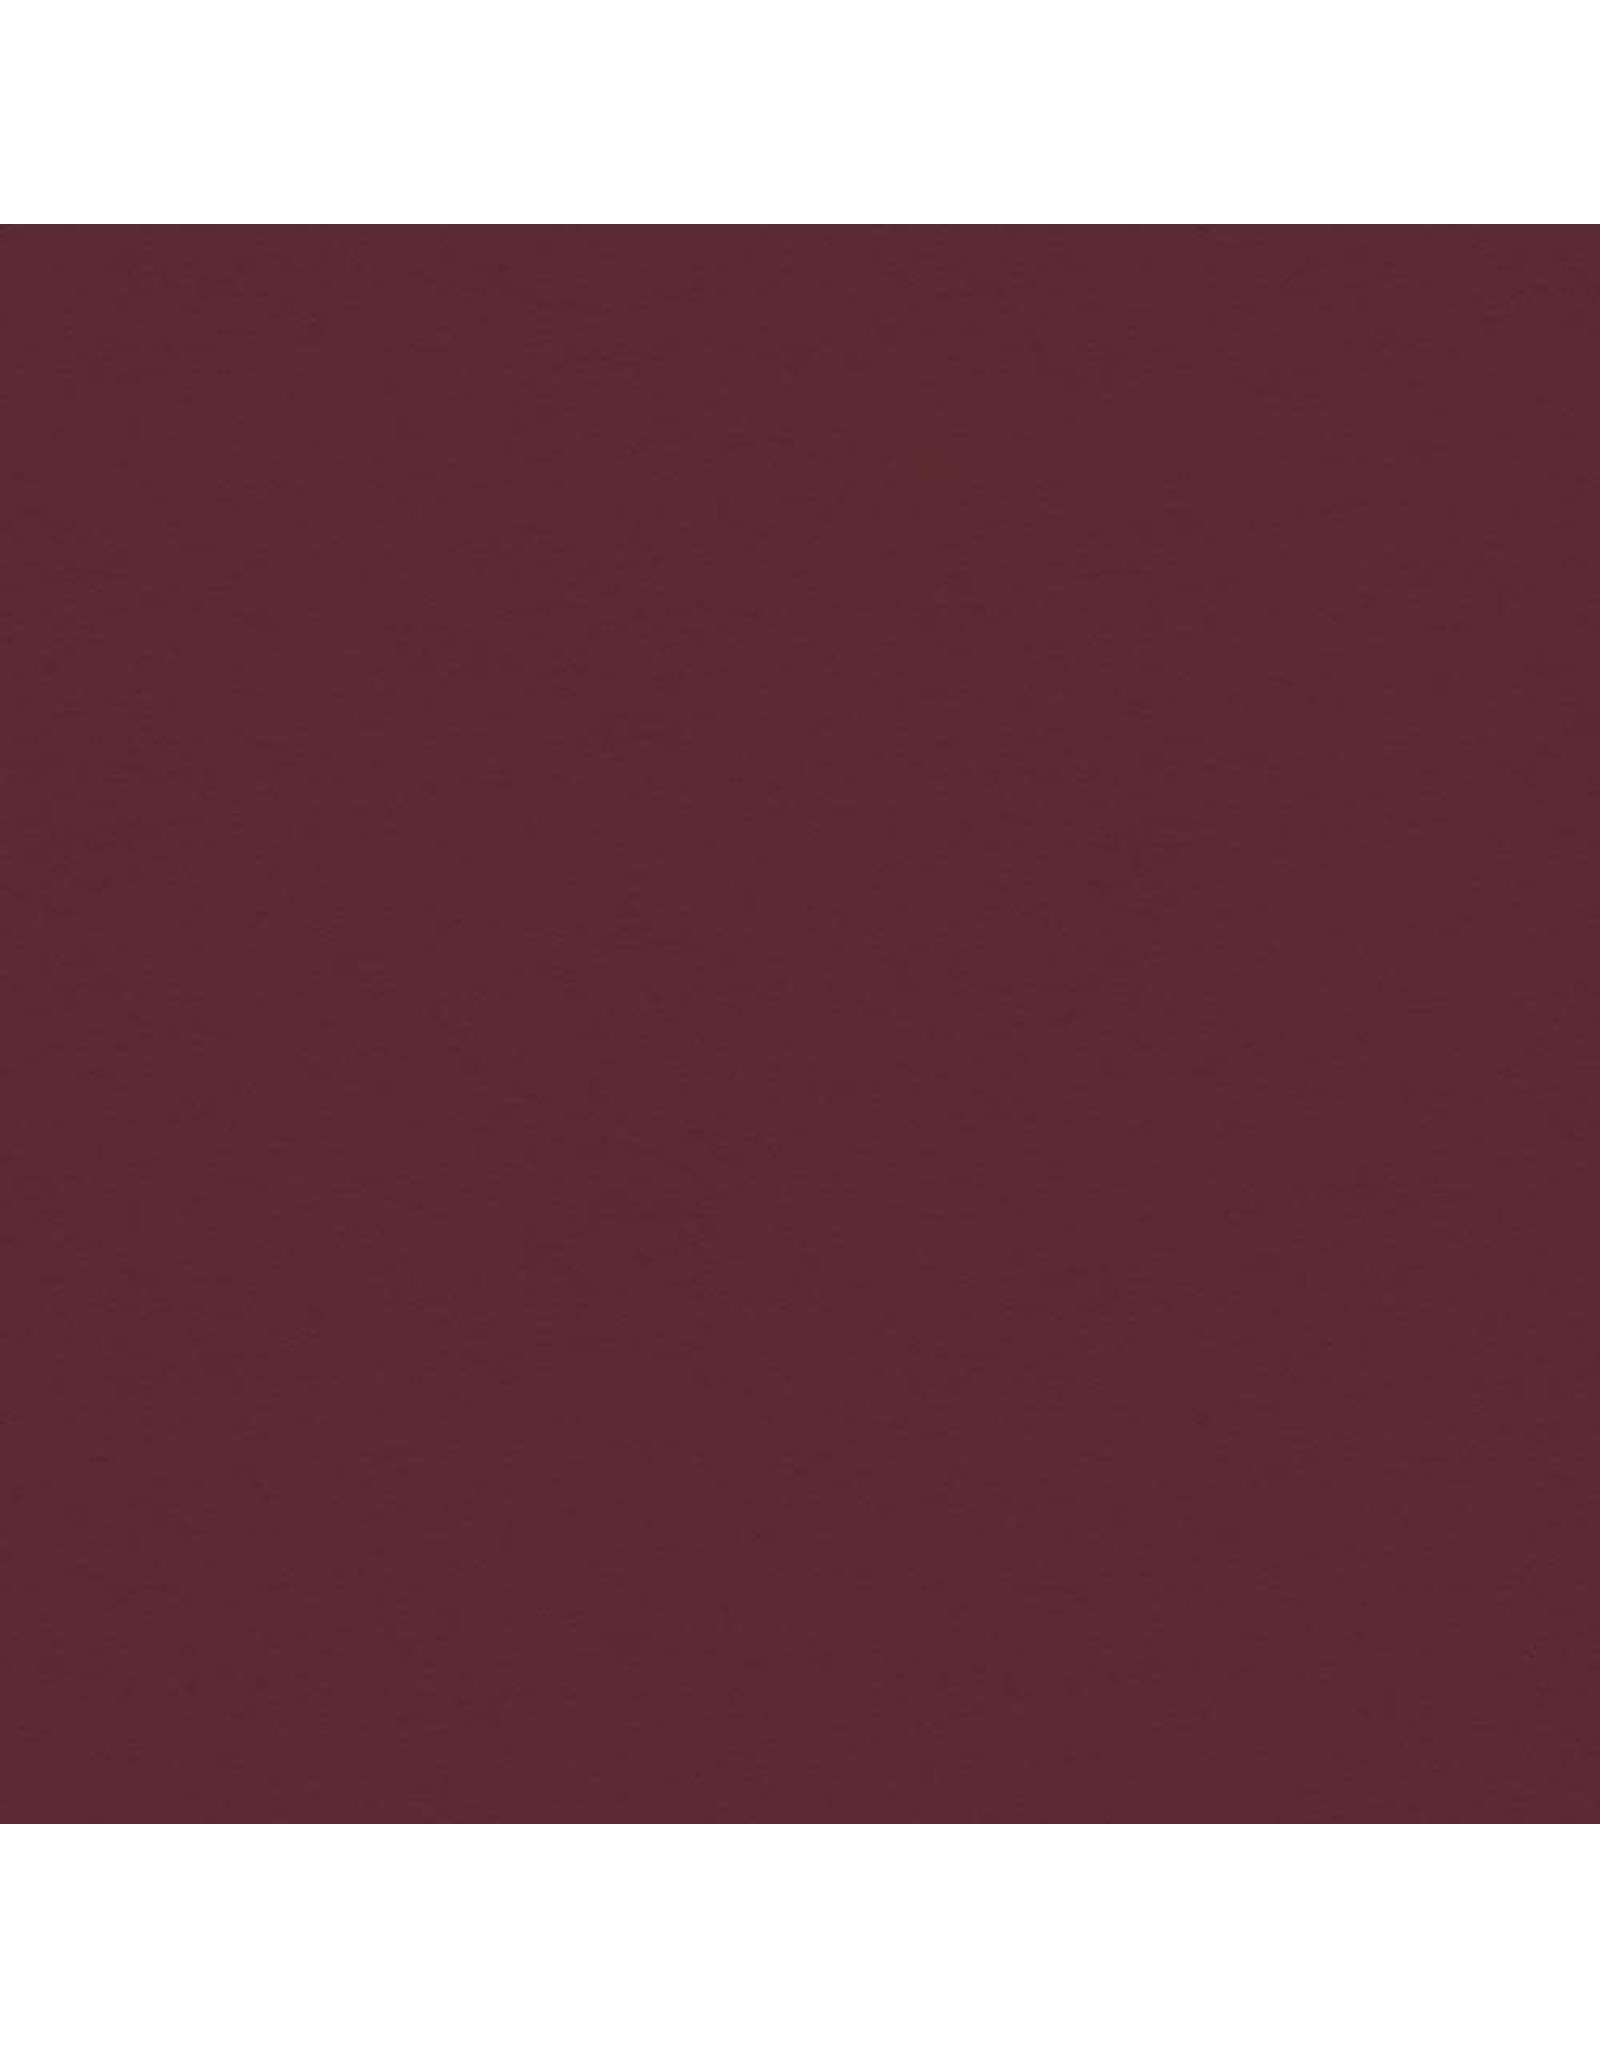 MY COLORS MY COLORS CLASSIC 80 LB COVER WEIGHT WINE 12x12 CARDSTOCK